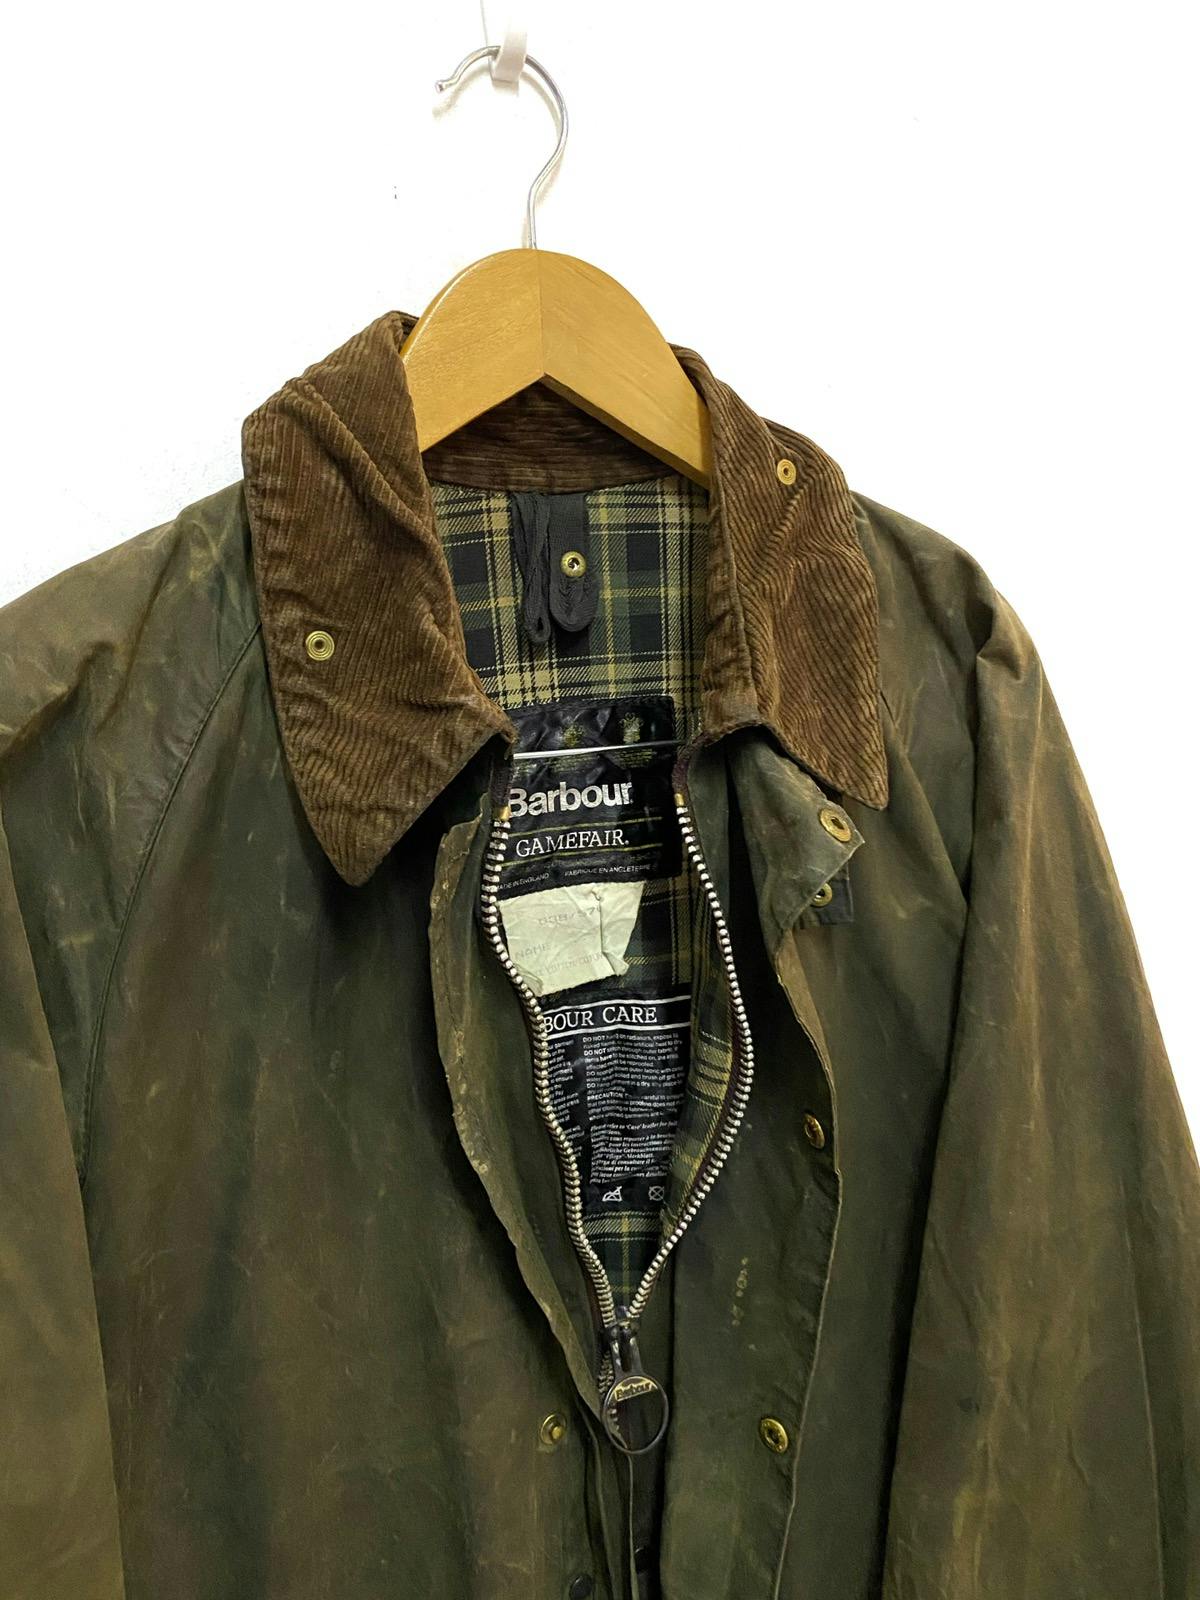 Barbour Gamefair Waxed Jacket Made in England - 8